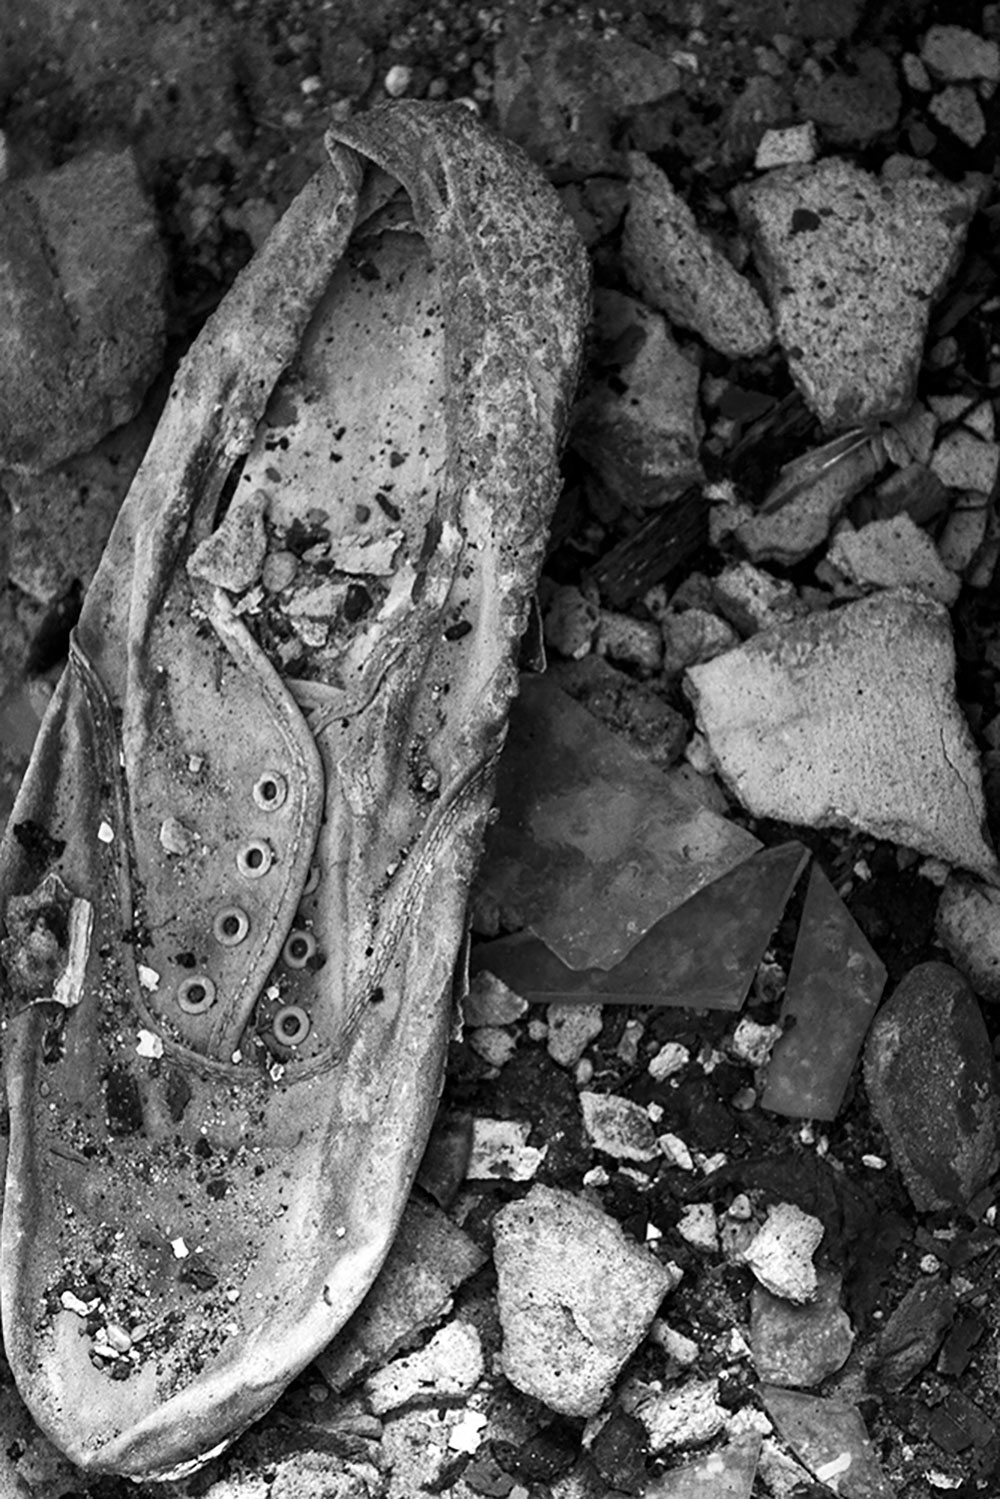 A black and white photographed image of a dirty shoe surrounded by rocks.